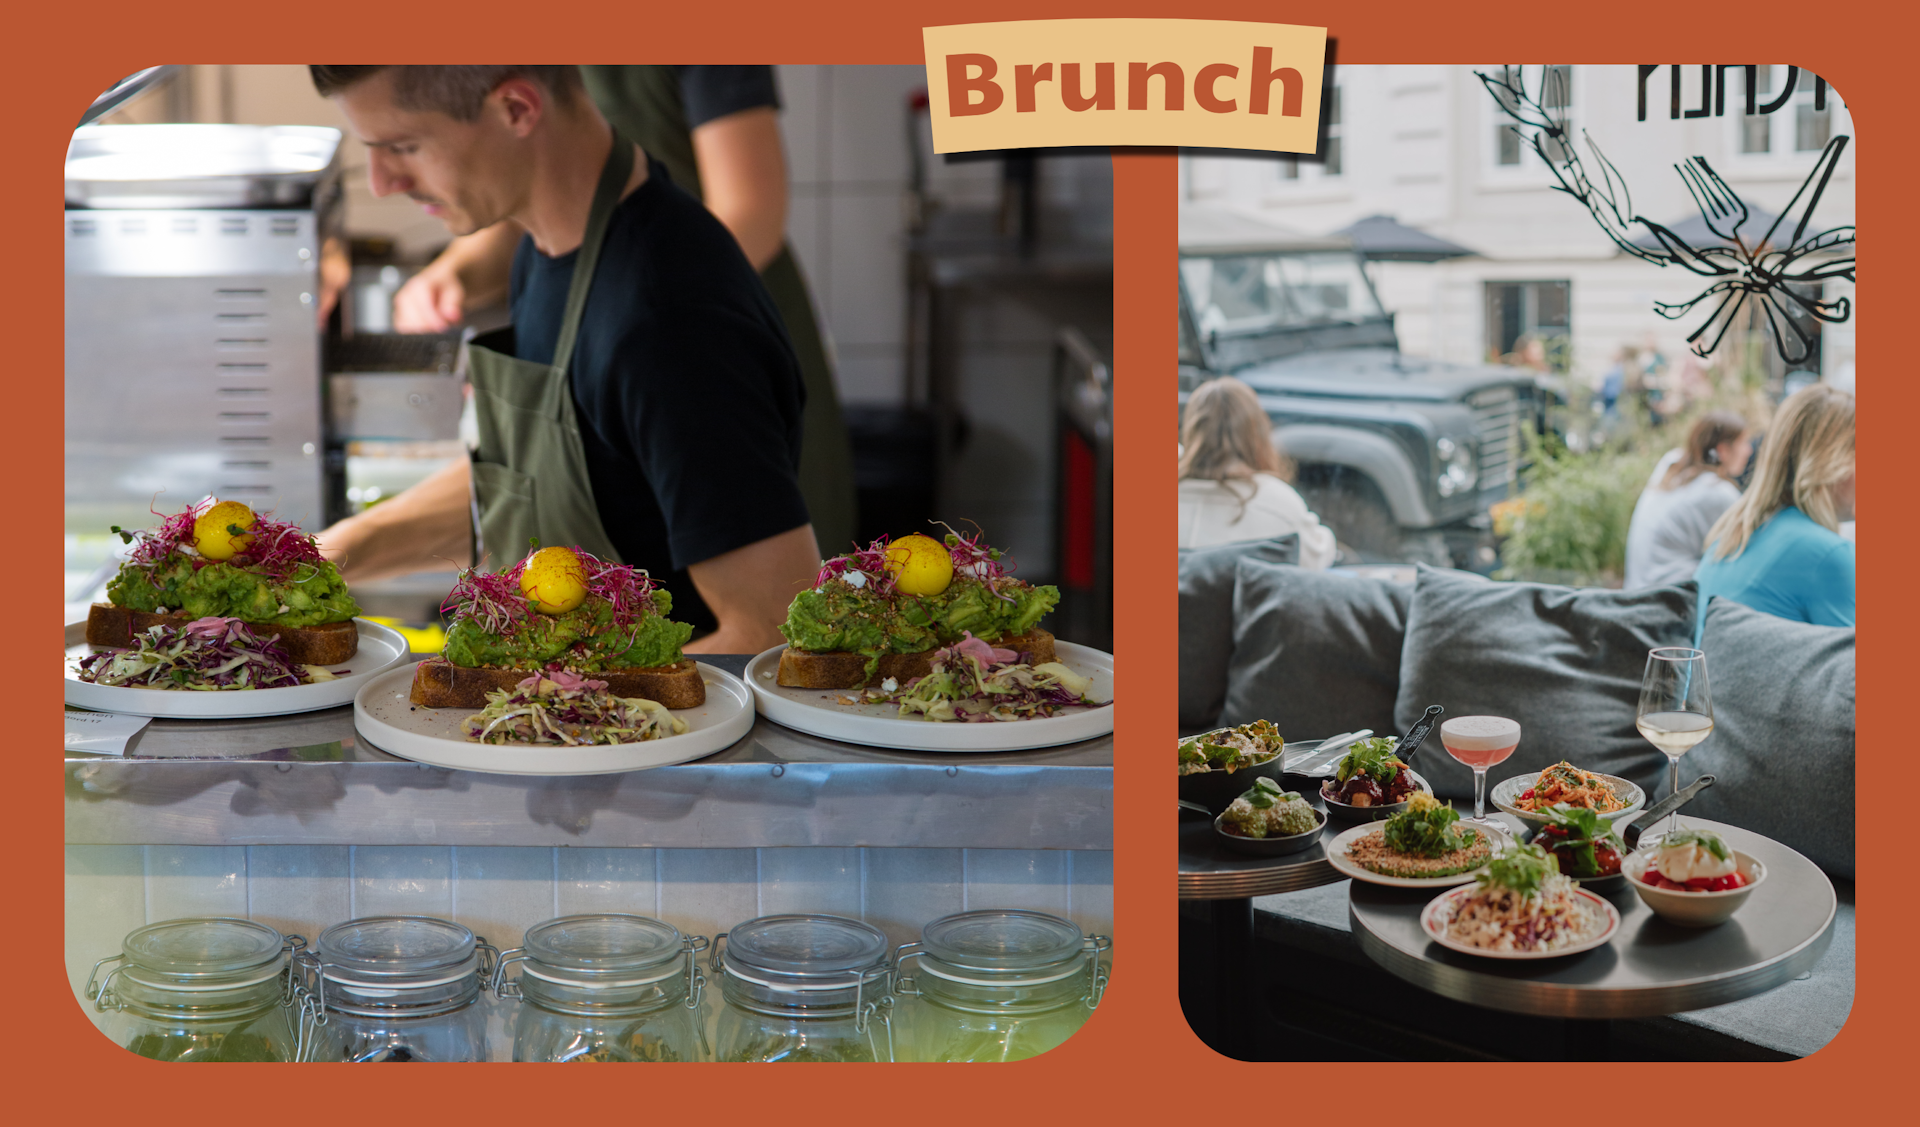 L: A plate of fresh Danish open sandwiches lie ready at the pass in Cadence. R: A spread of brunch dishes laid out near a window seat in Union City Kitchen